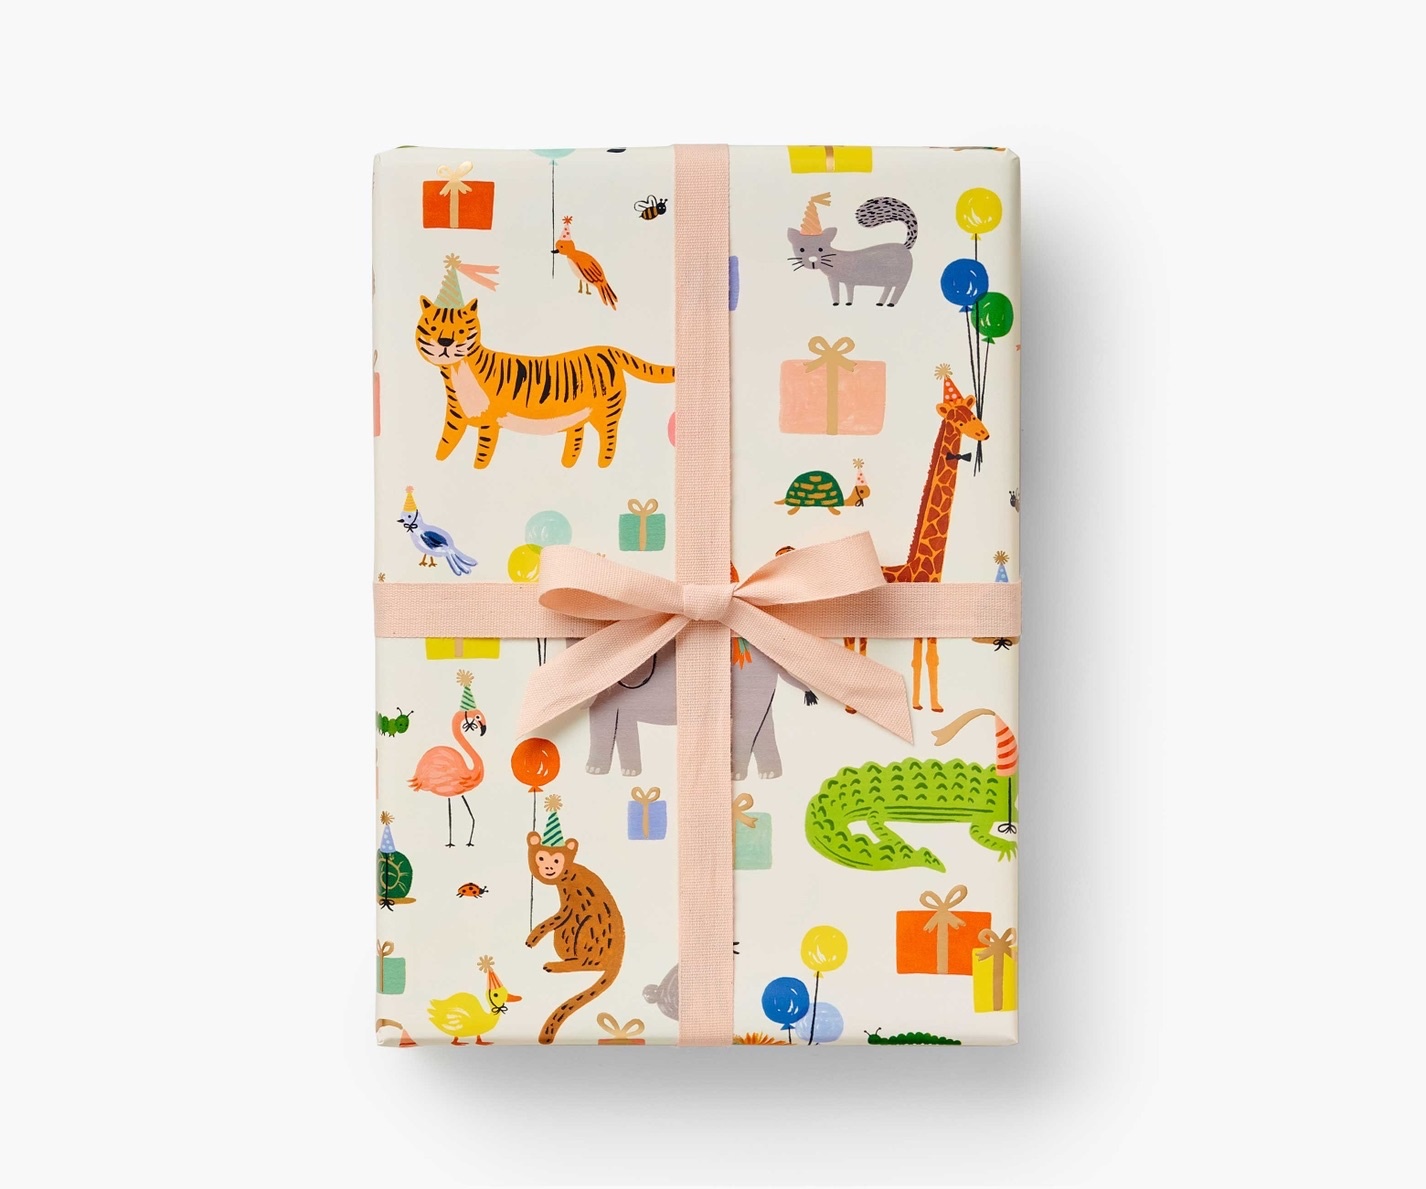 Brown Cow Cattle Horns Premium Gift Wrap Wrapping Paper Roll